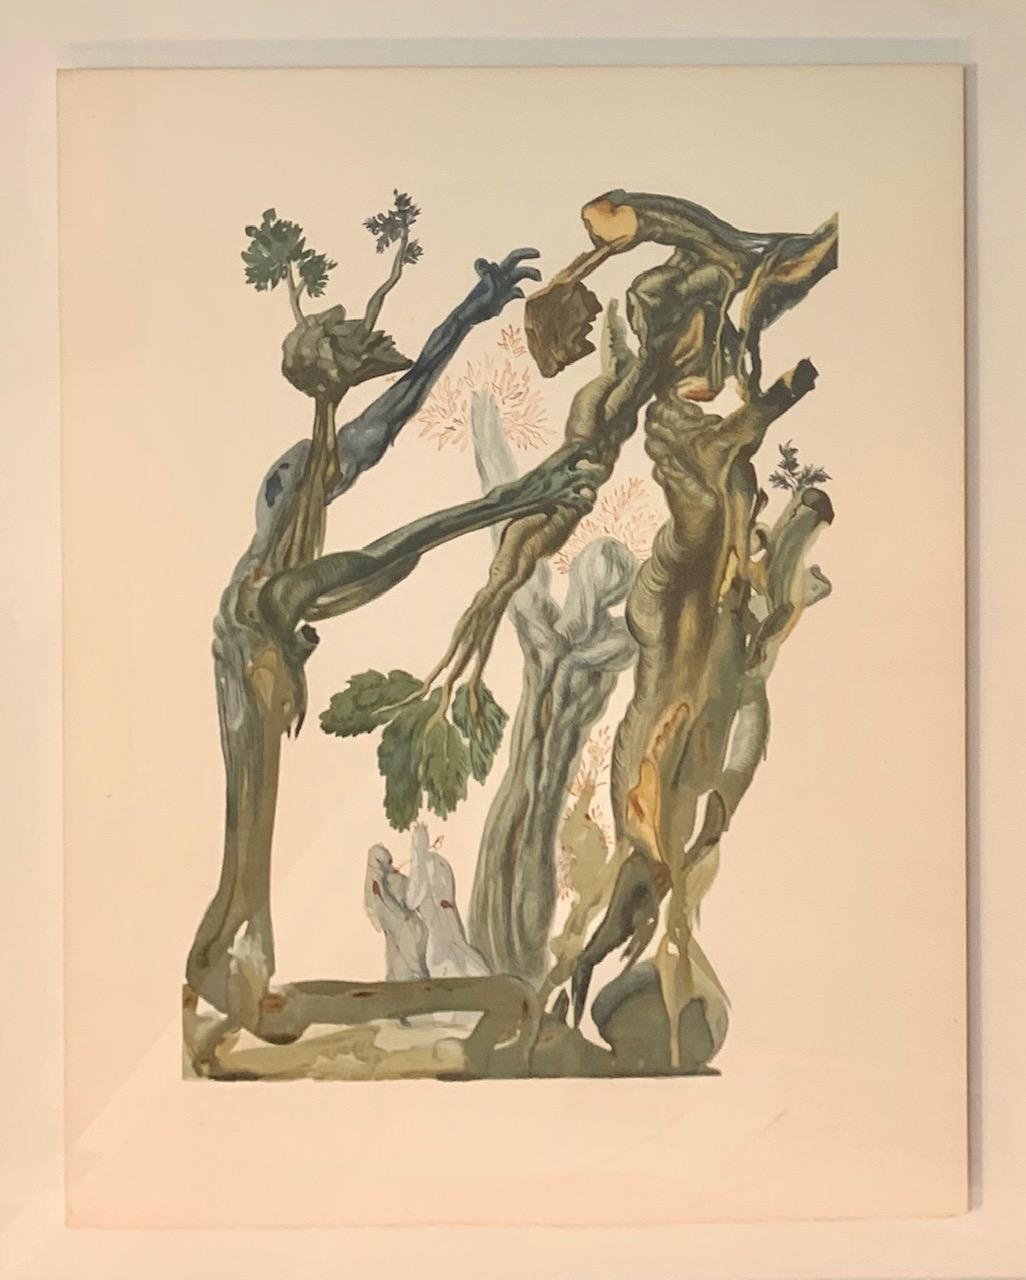 The Wood and the Suicide - Print by Salvador Dalí